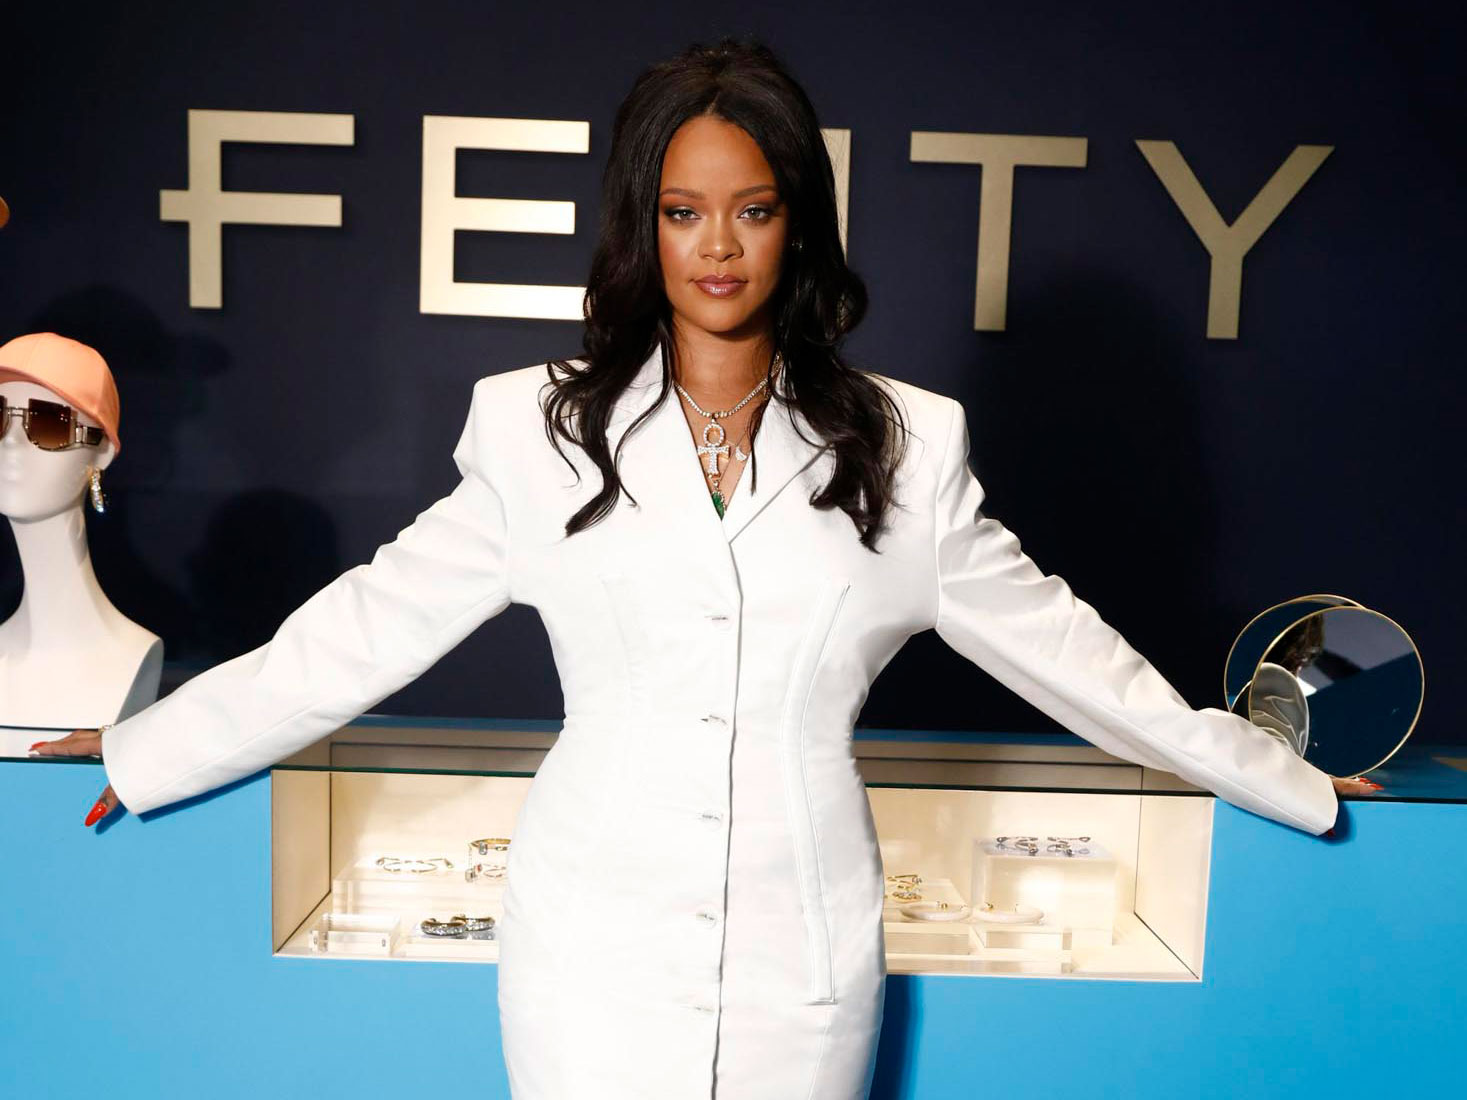 Rihanna shows off her fashion credentials in khaki miniskirt at Fenty  clothing launch in Paris